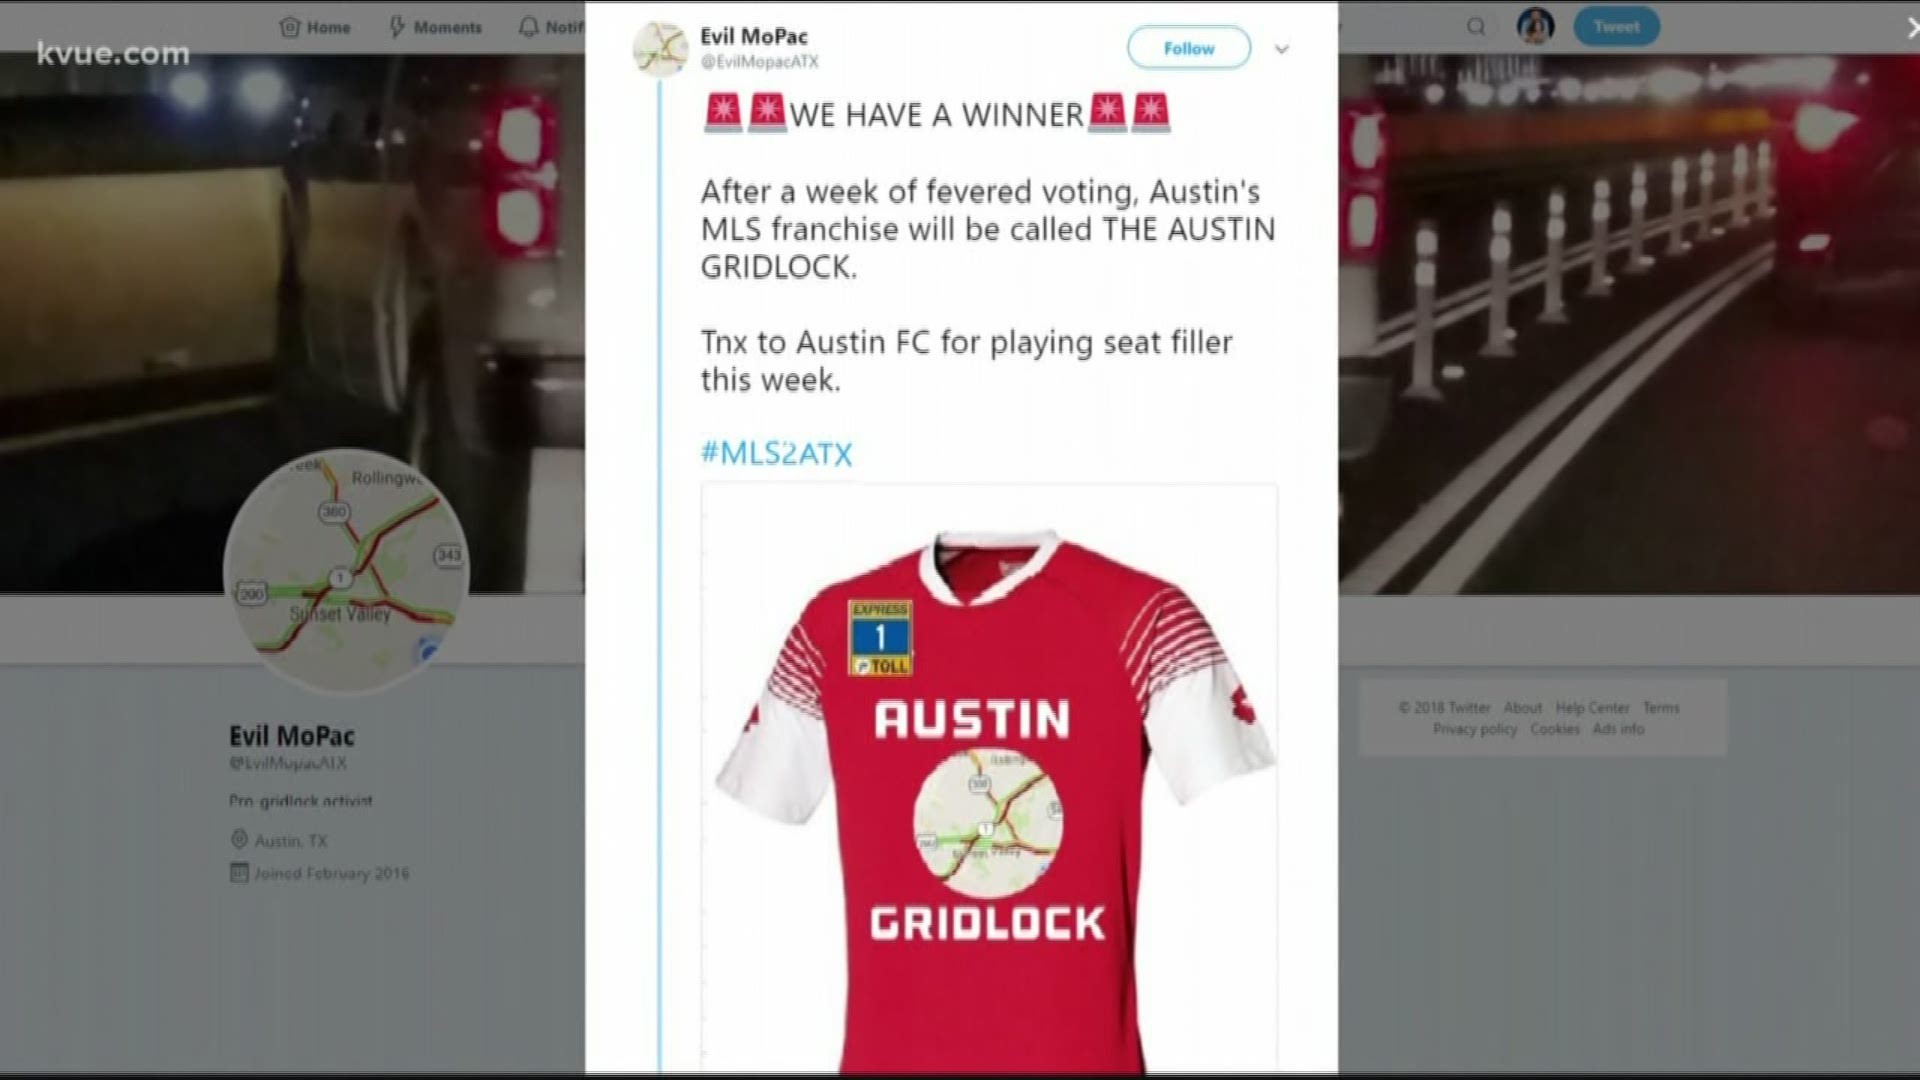 Satirical Twitter page Evil MoPac has thrown in its two cents on what Austin's MLS team should be named.